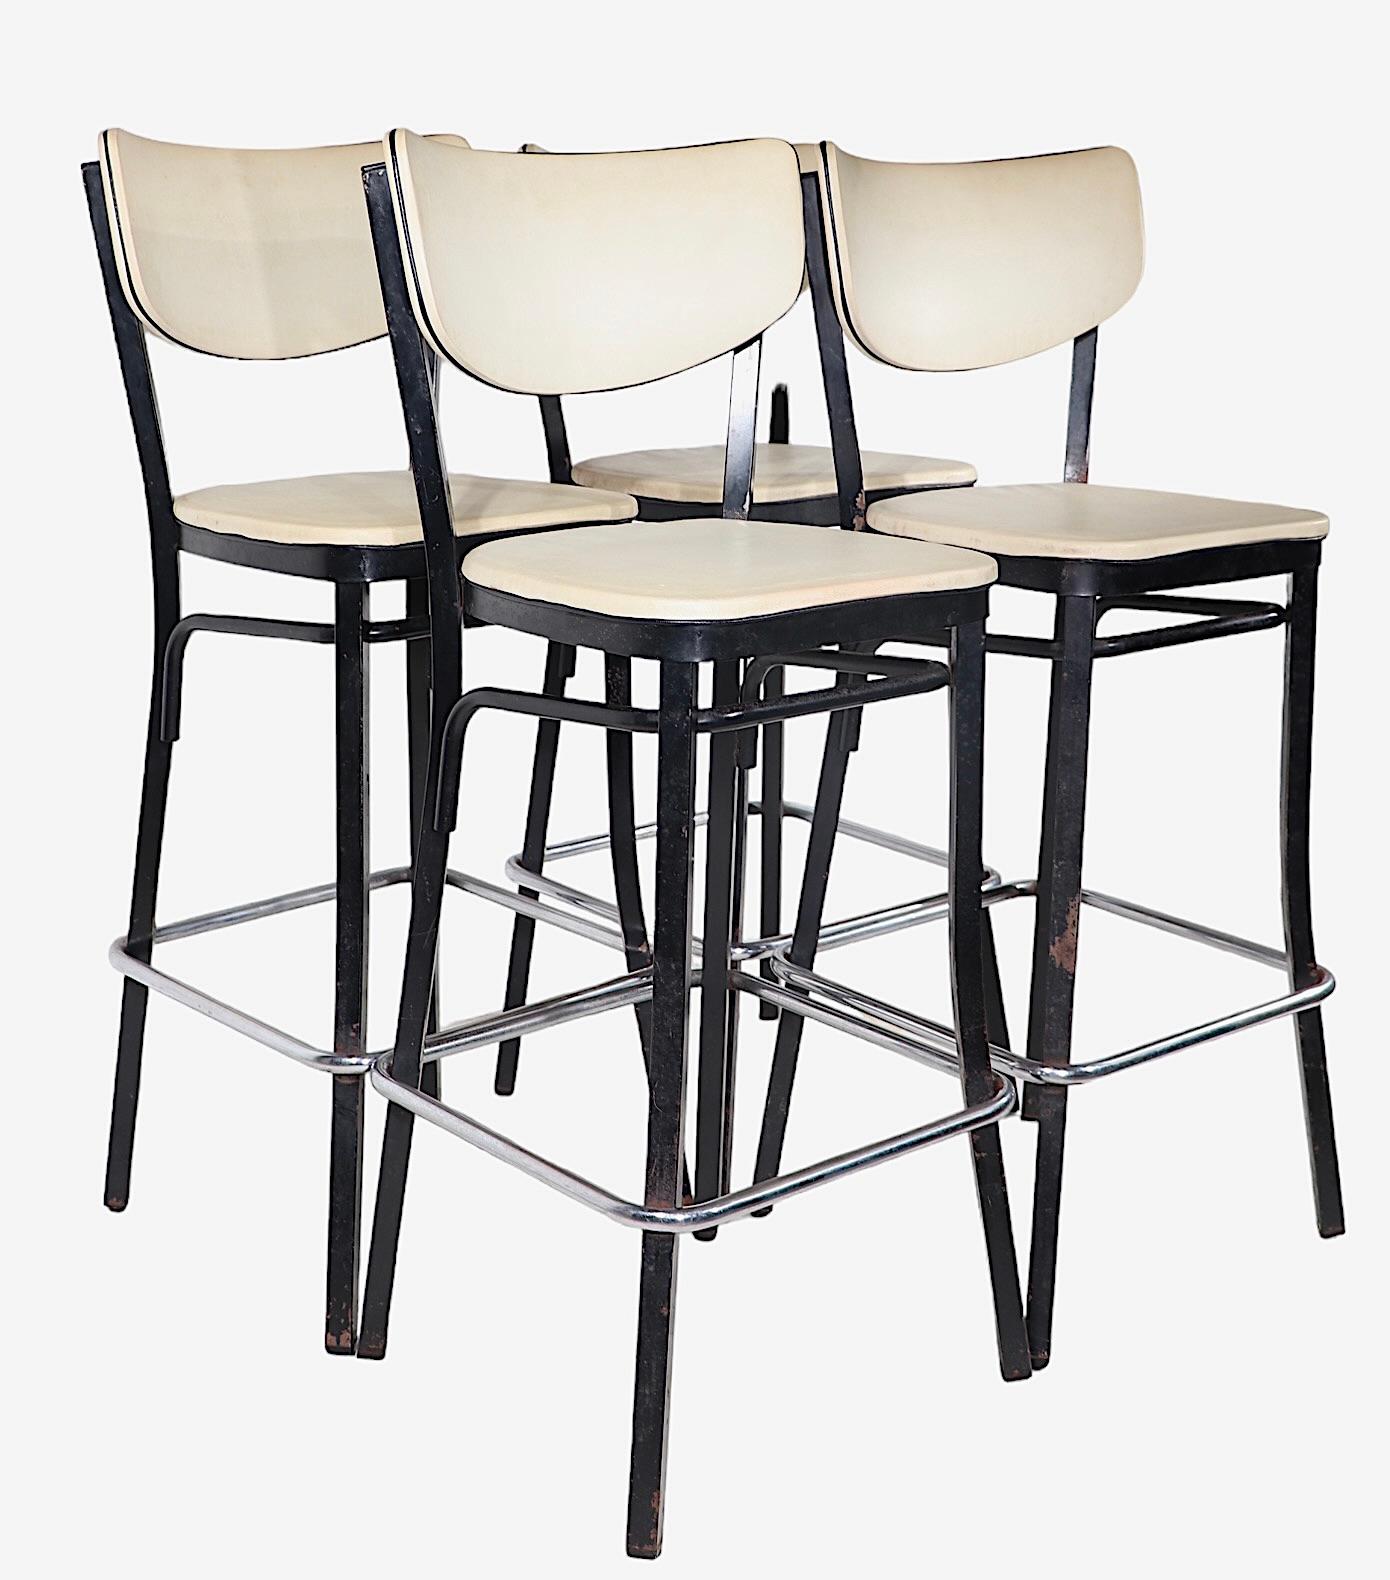 Set of Four Mid Century Bar Stools by Finer Chrome Products Co. Inc. c 1950/1960 For Sale 3